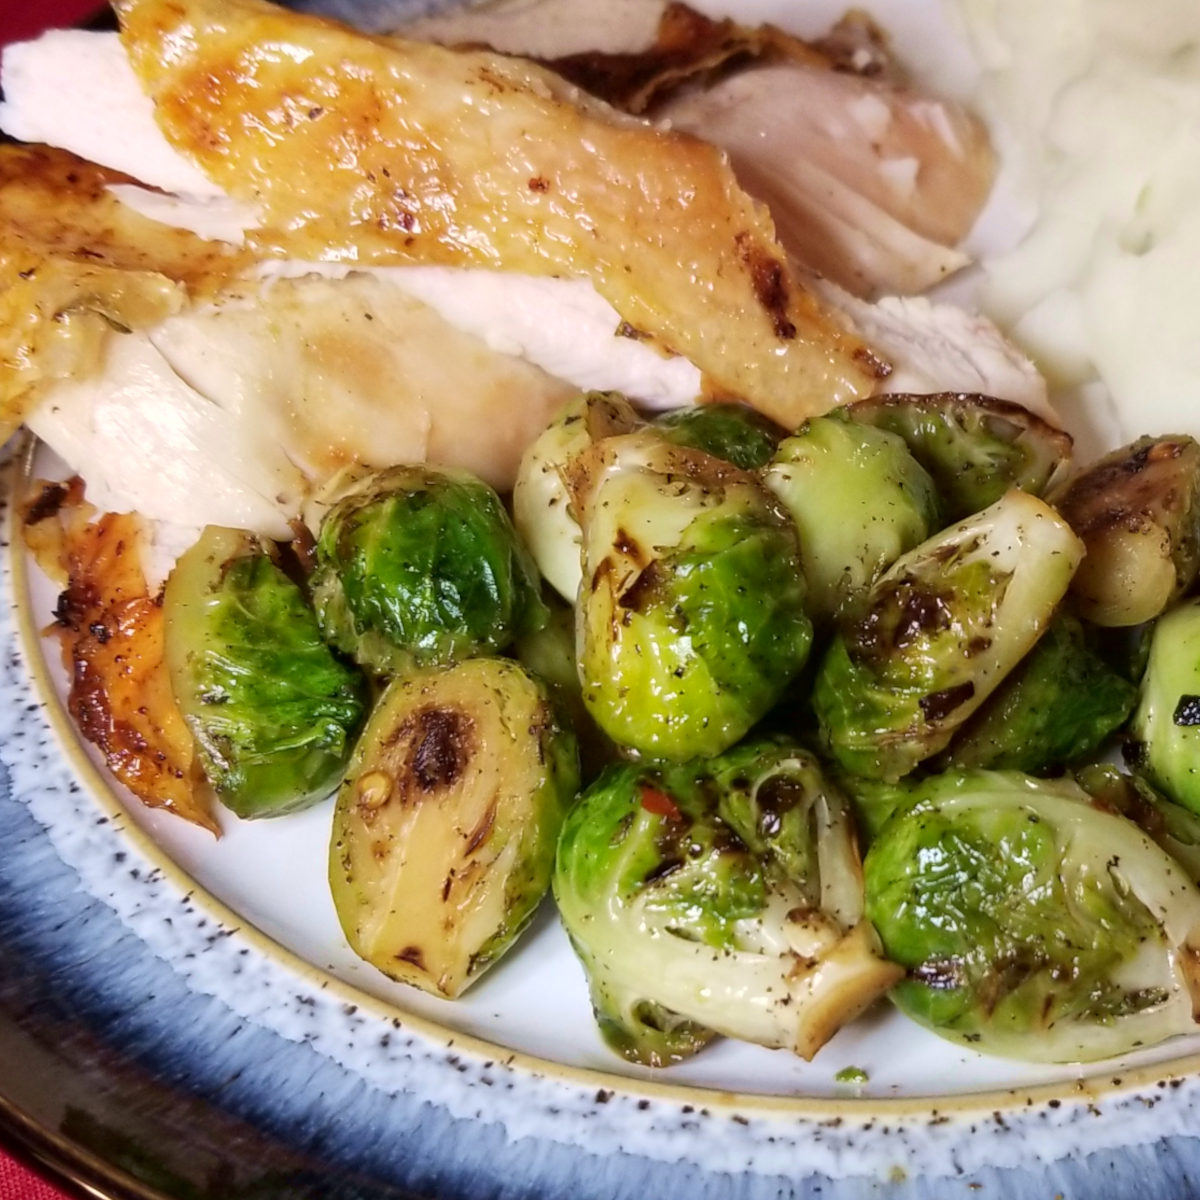 Charred brussels sprouts served with roasted chicken and mashed potatoes.